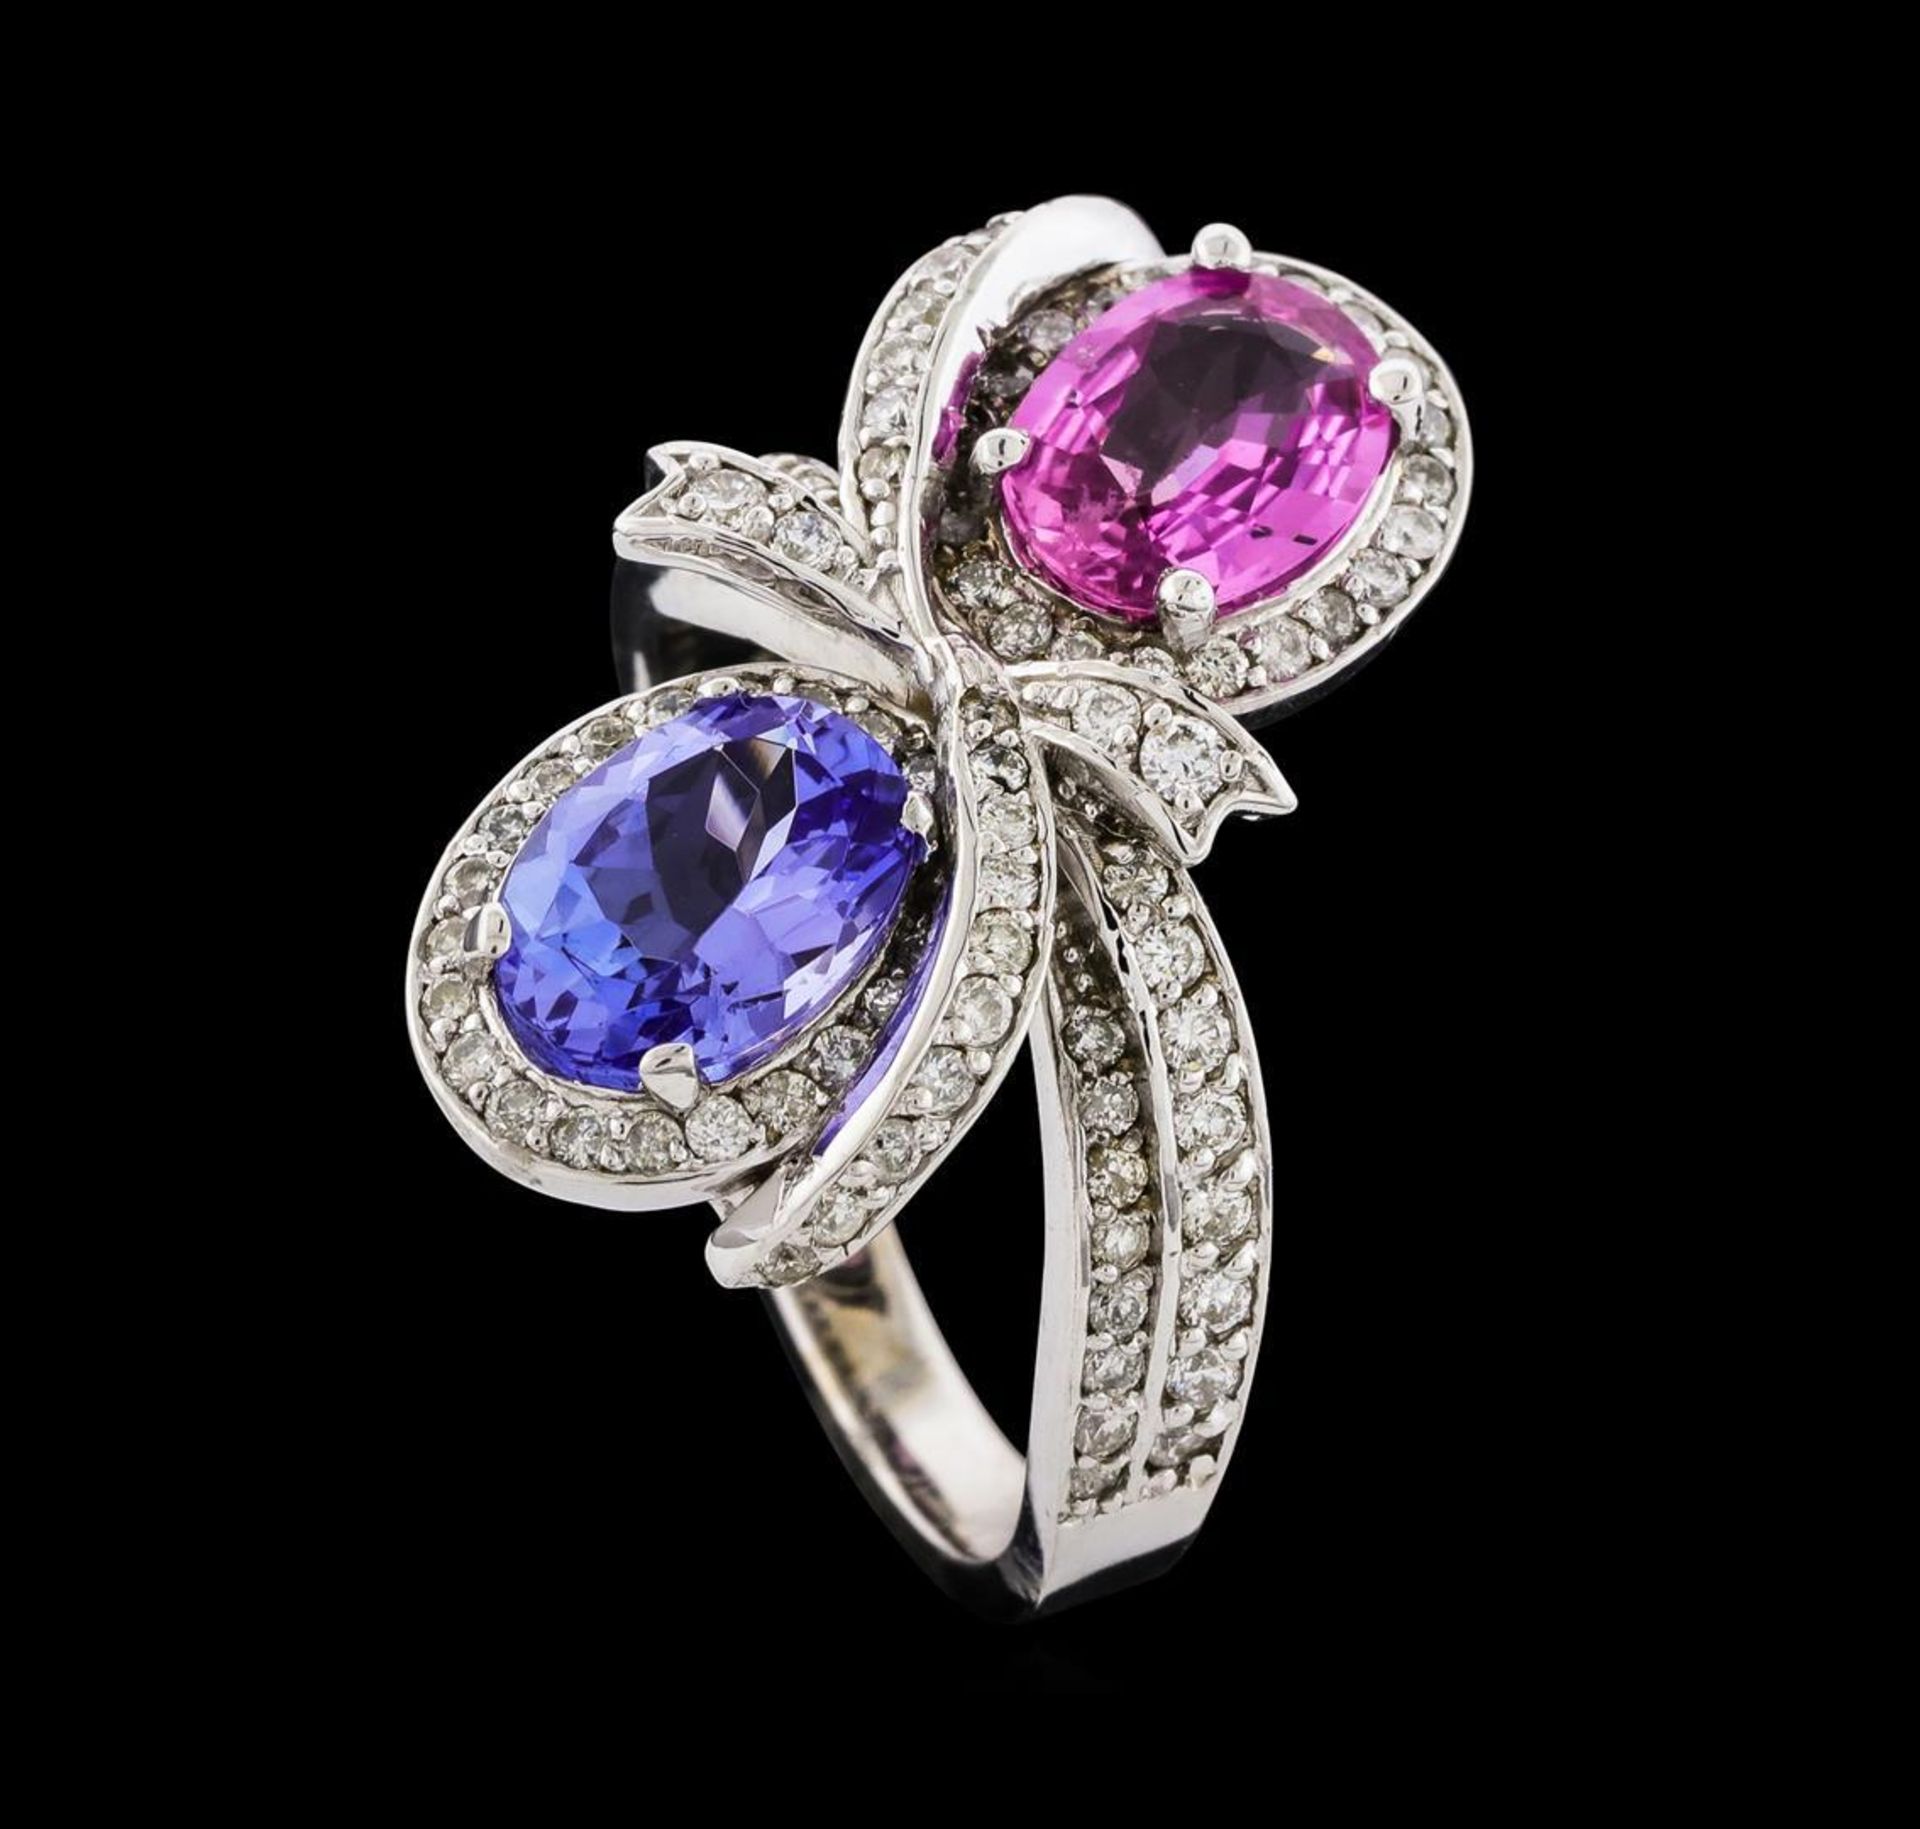 2.55 ctw Tanzanite, Pink Sapphire, and Diamond Ring - 14KT White Gold - Image 4 of 6